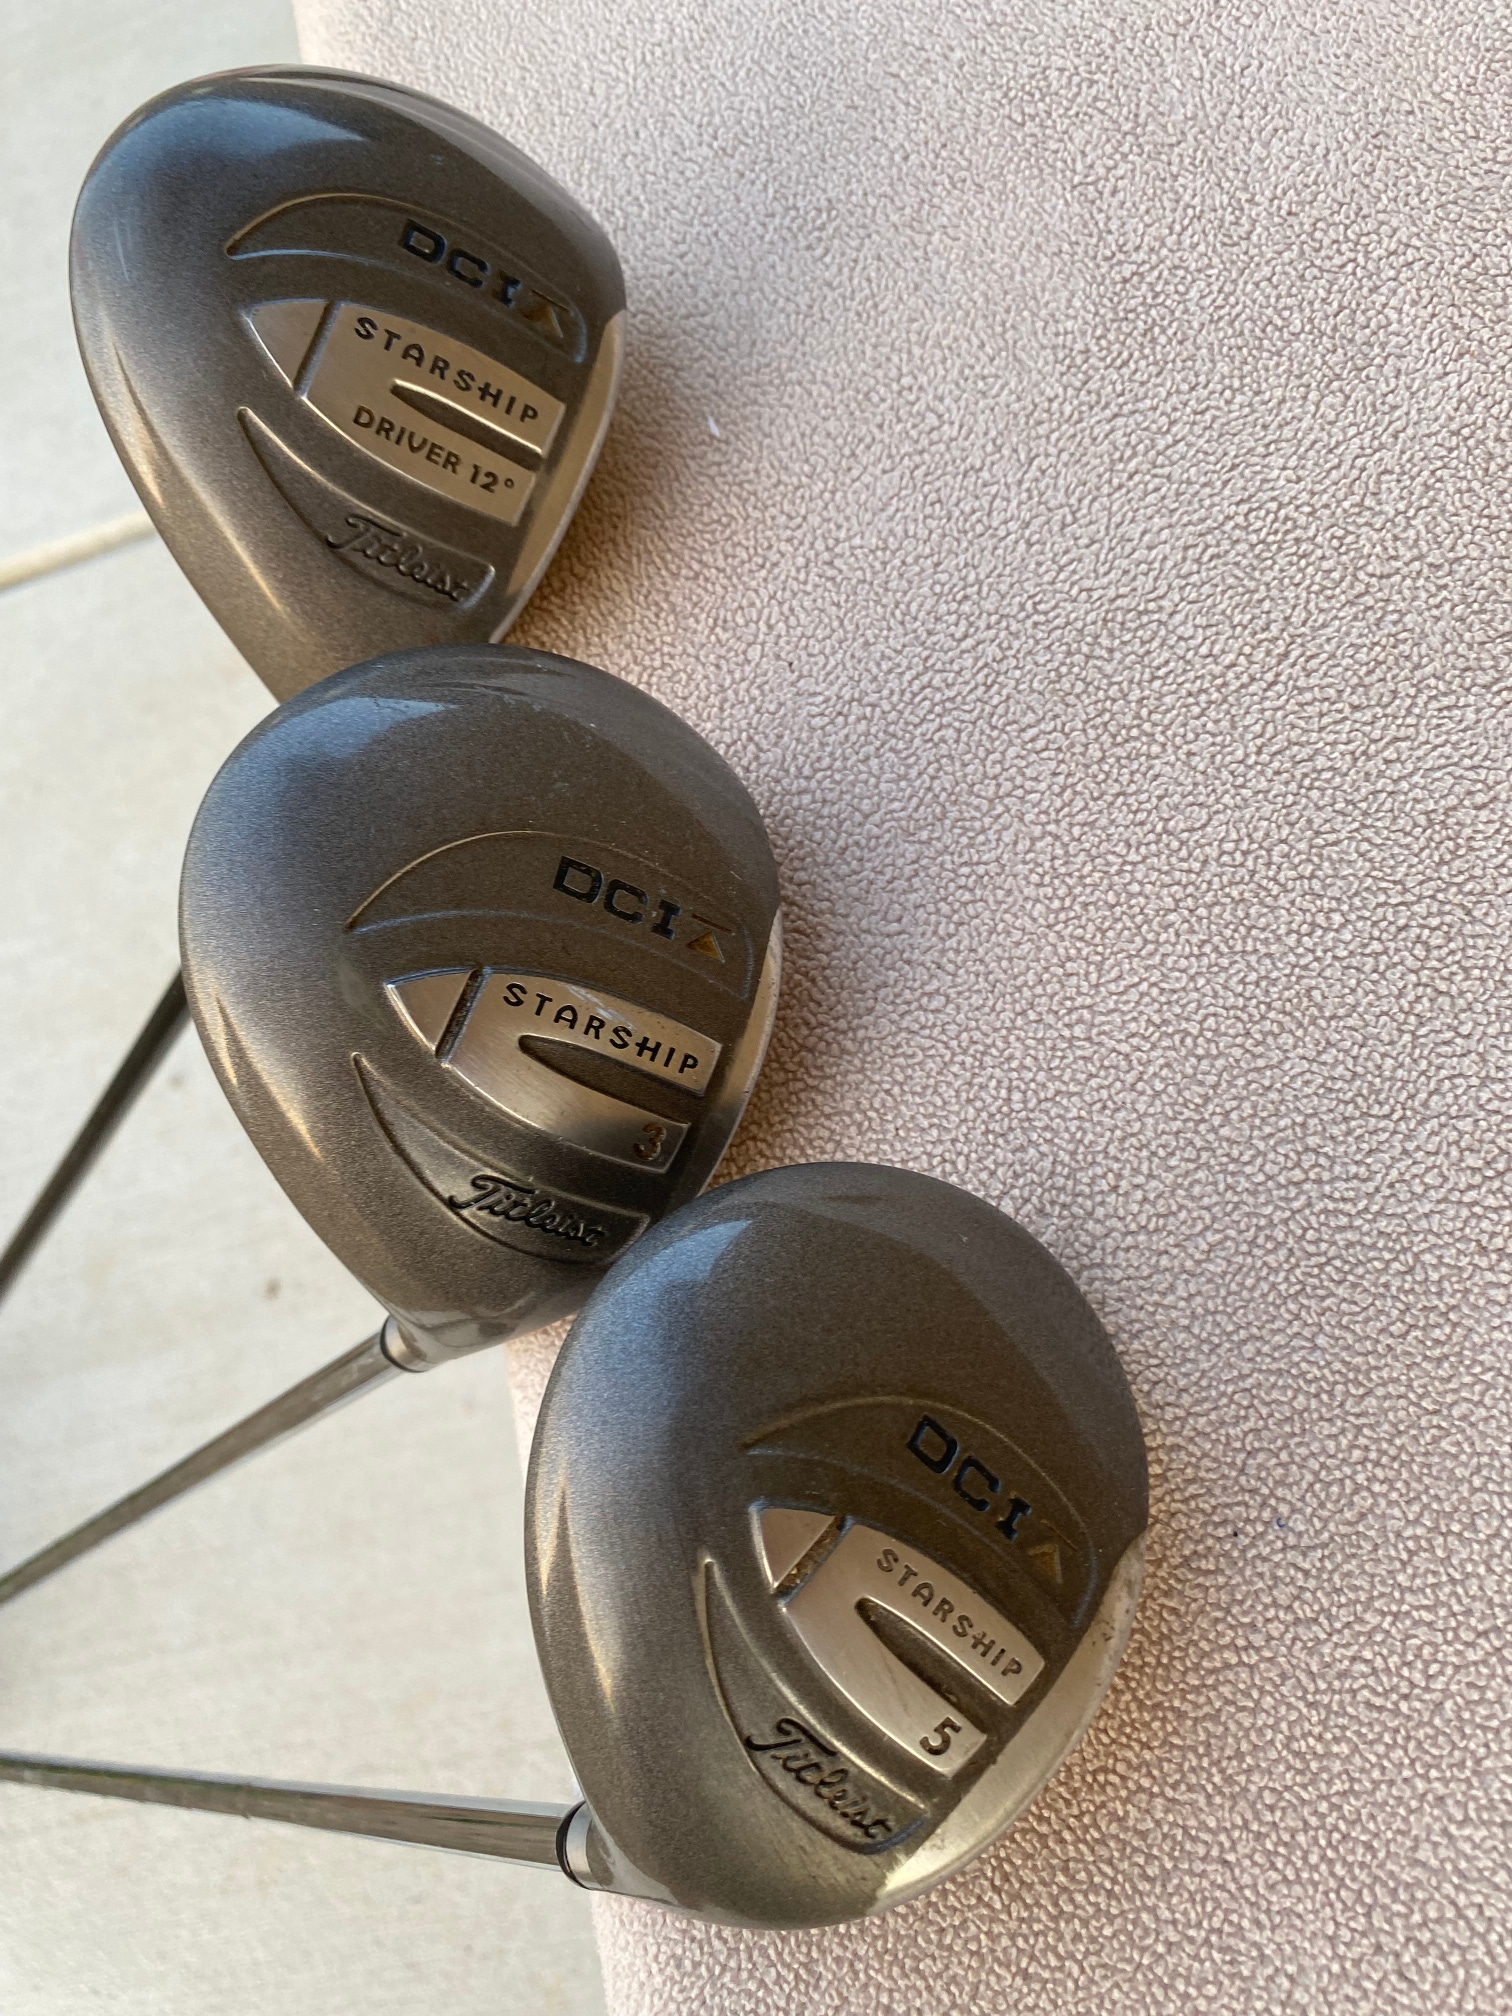 Women's Used Titleist Right Handed Dci Clubs (Full Set) Uniflex